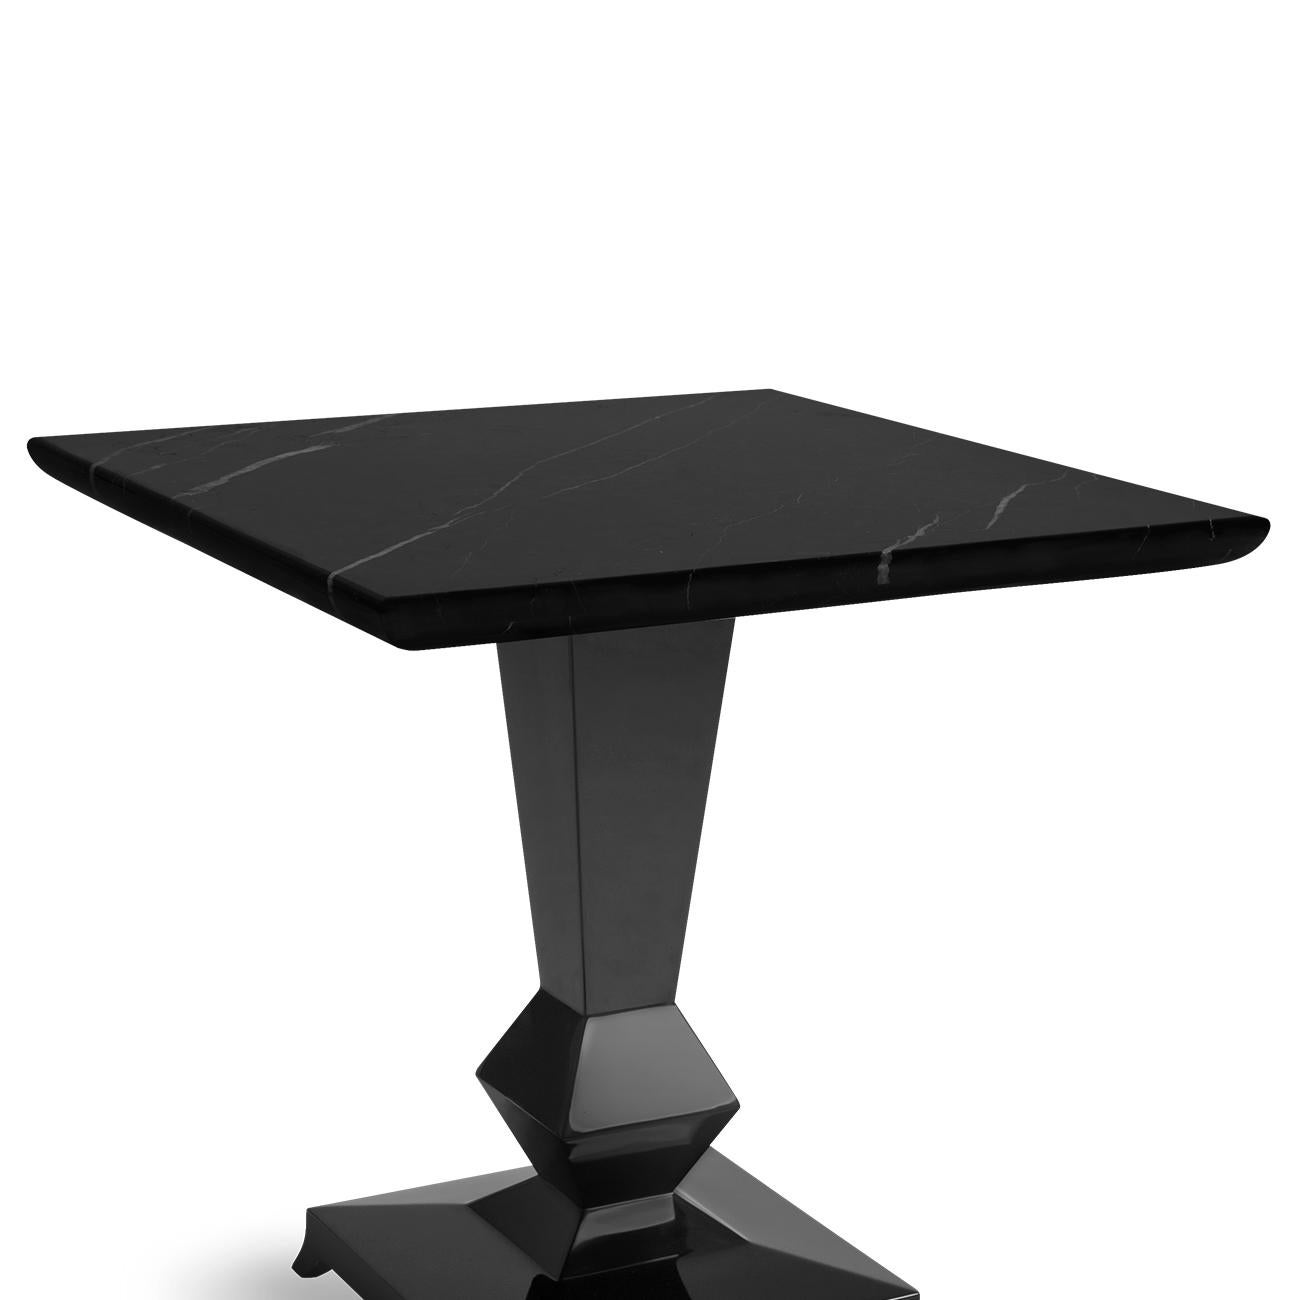 Side table dark marble with solid mahogany
wood base in black lacquered finish. With soli
black marble top Nero Marquina.